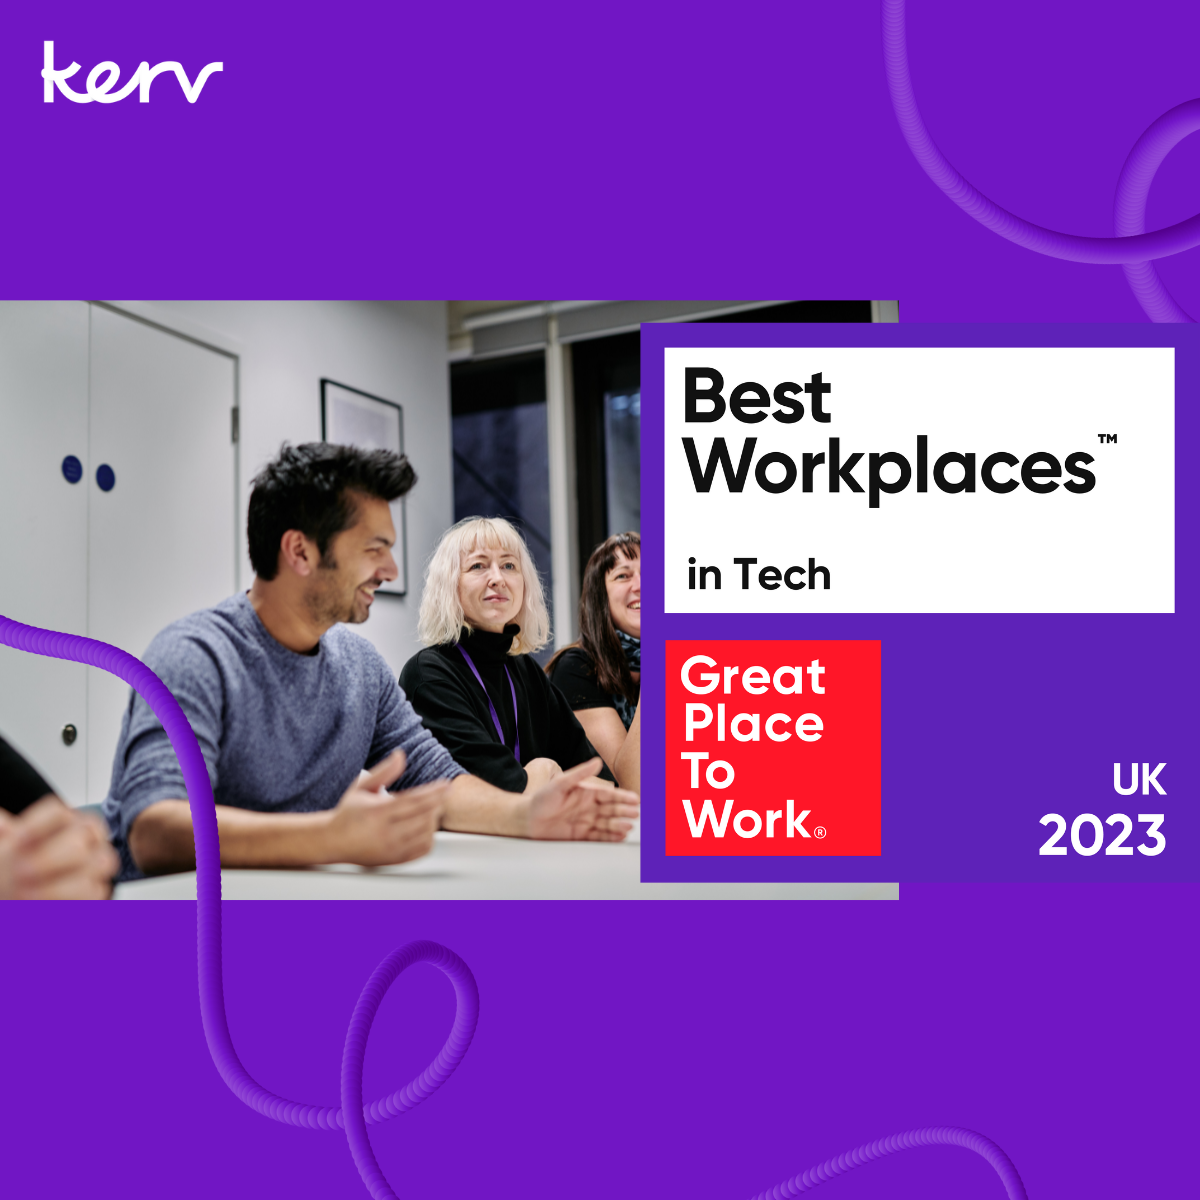 Kerv is officially one of the UK’s Best Workplaces in Tech!